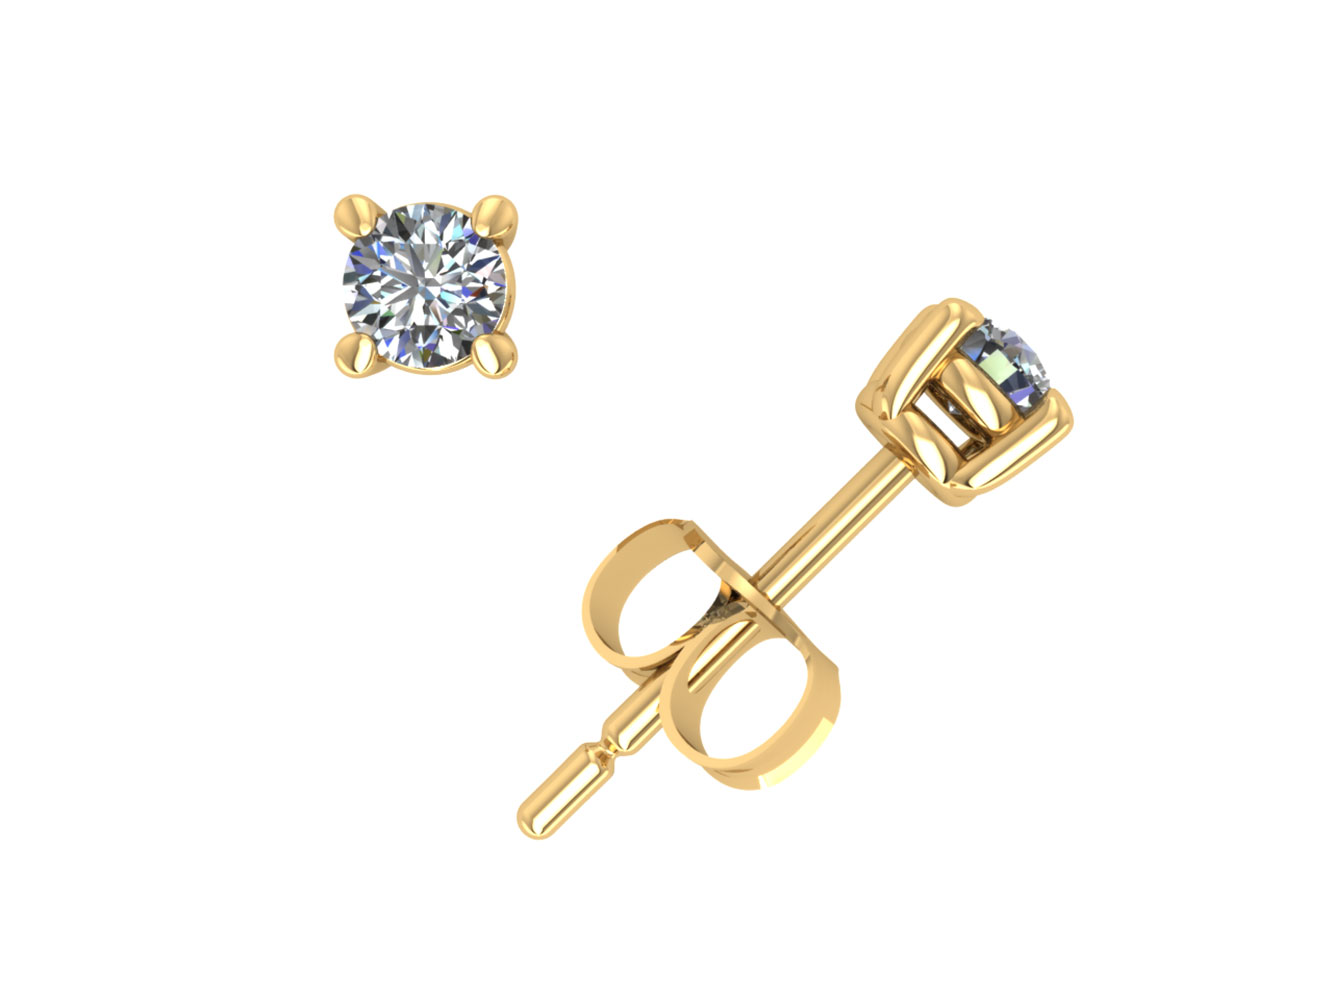 Jewel We Sell Natural 0.15Ct Round Cut Diamond Basket Stud Earrings 14k White or Yellow Gold Prong F VS2